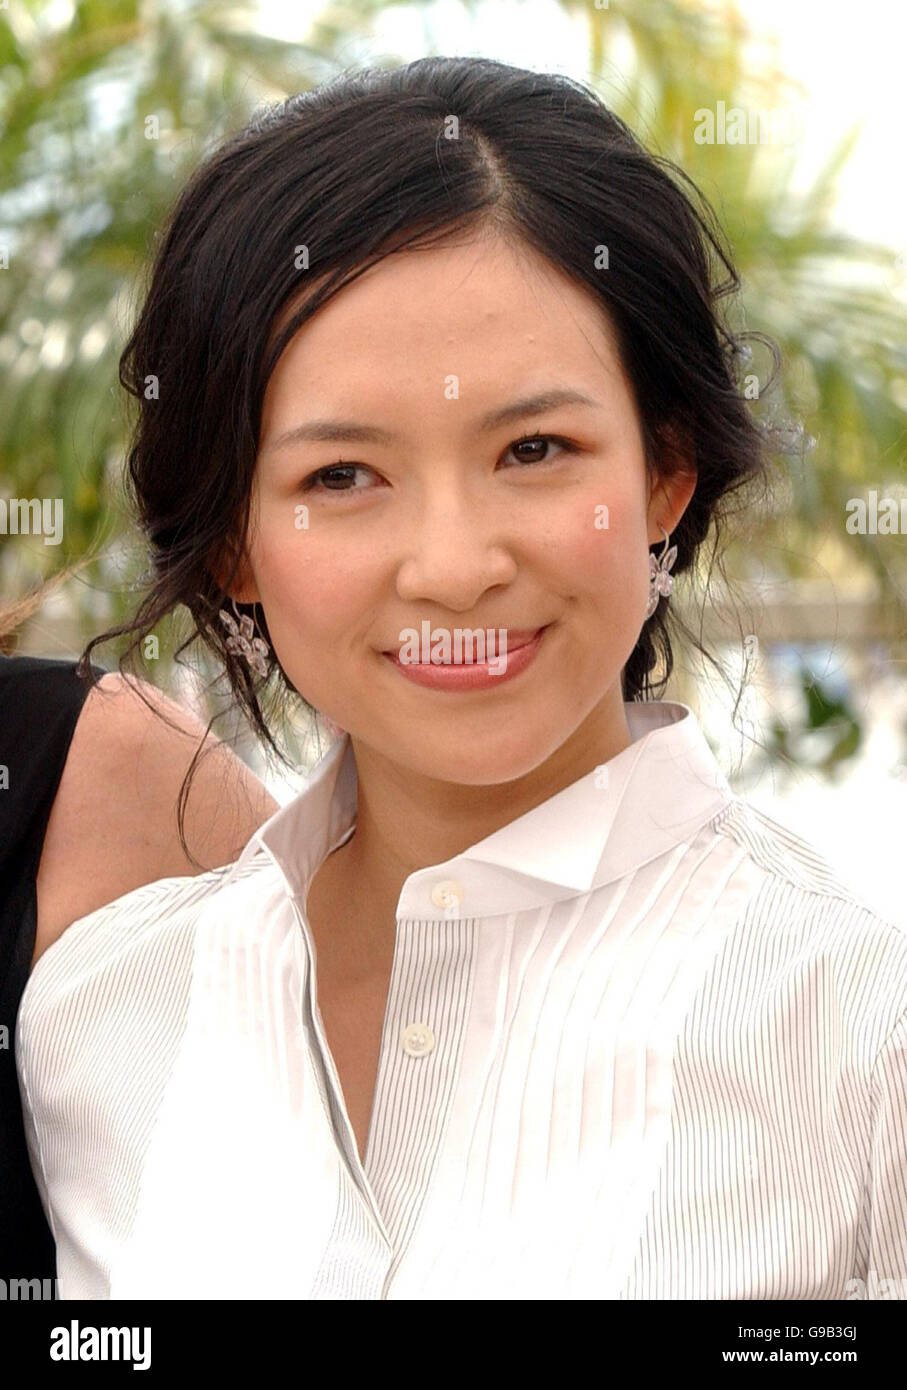 The Cannes 2006 Jury Photocall, 59th Festival De Cannes - France. Zhang Ziyi poses for photographers during the photocall for the Cannes Jury in the Palais du Festival, Cannes. Stock Photo